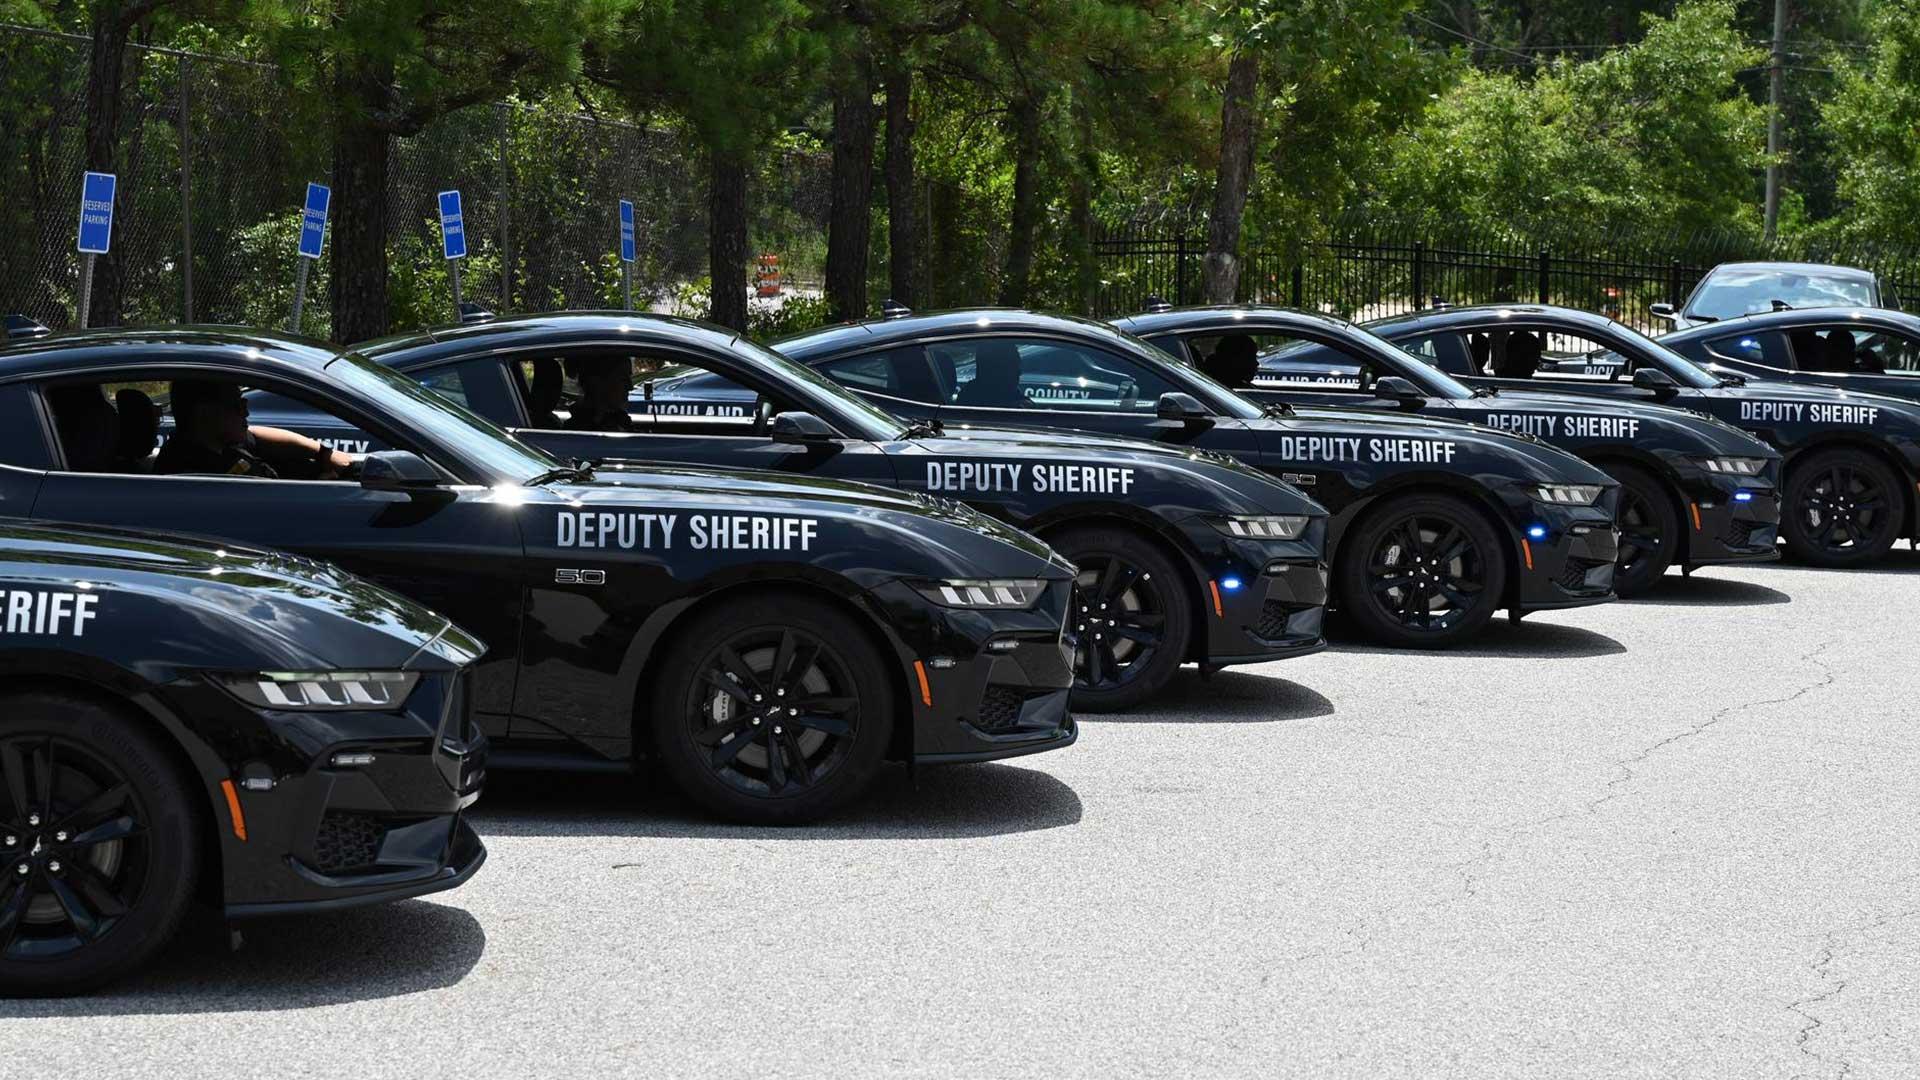 A police station in America is buying 17 Ford Mustangs with V8 engines